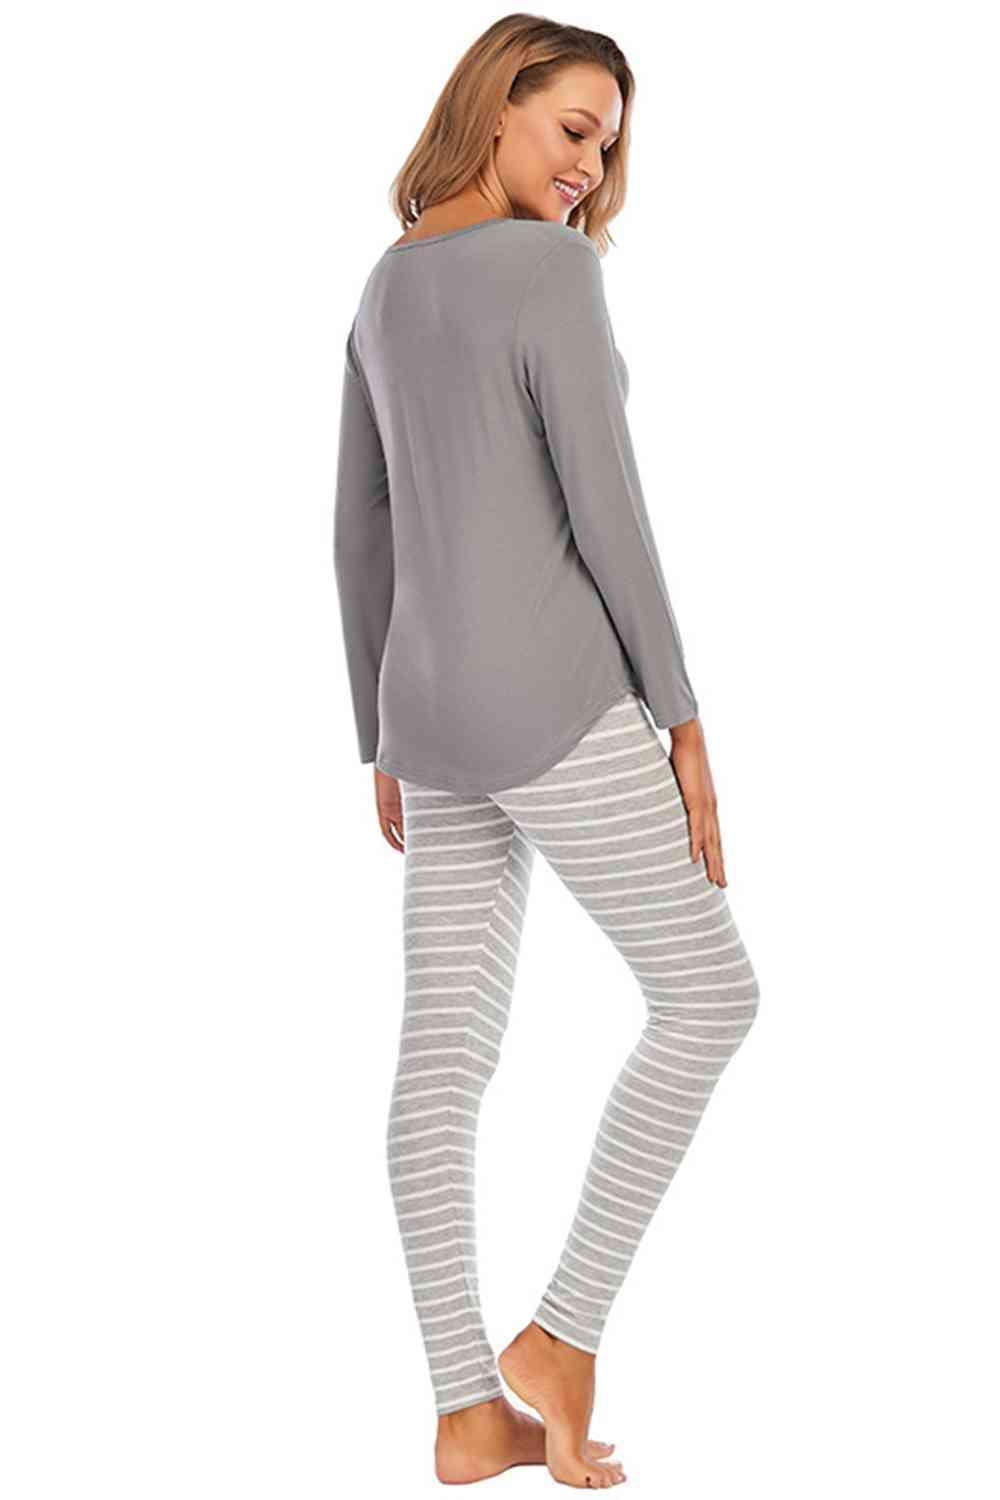 Relaxed Long Sleeve Top and Striped Pants Set - MXSTUDIO.COM